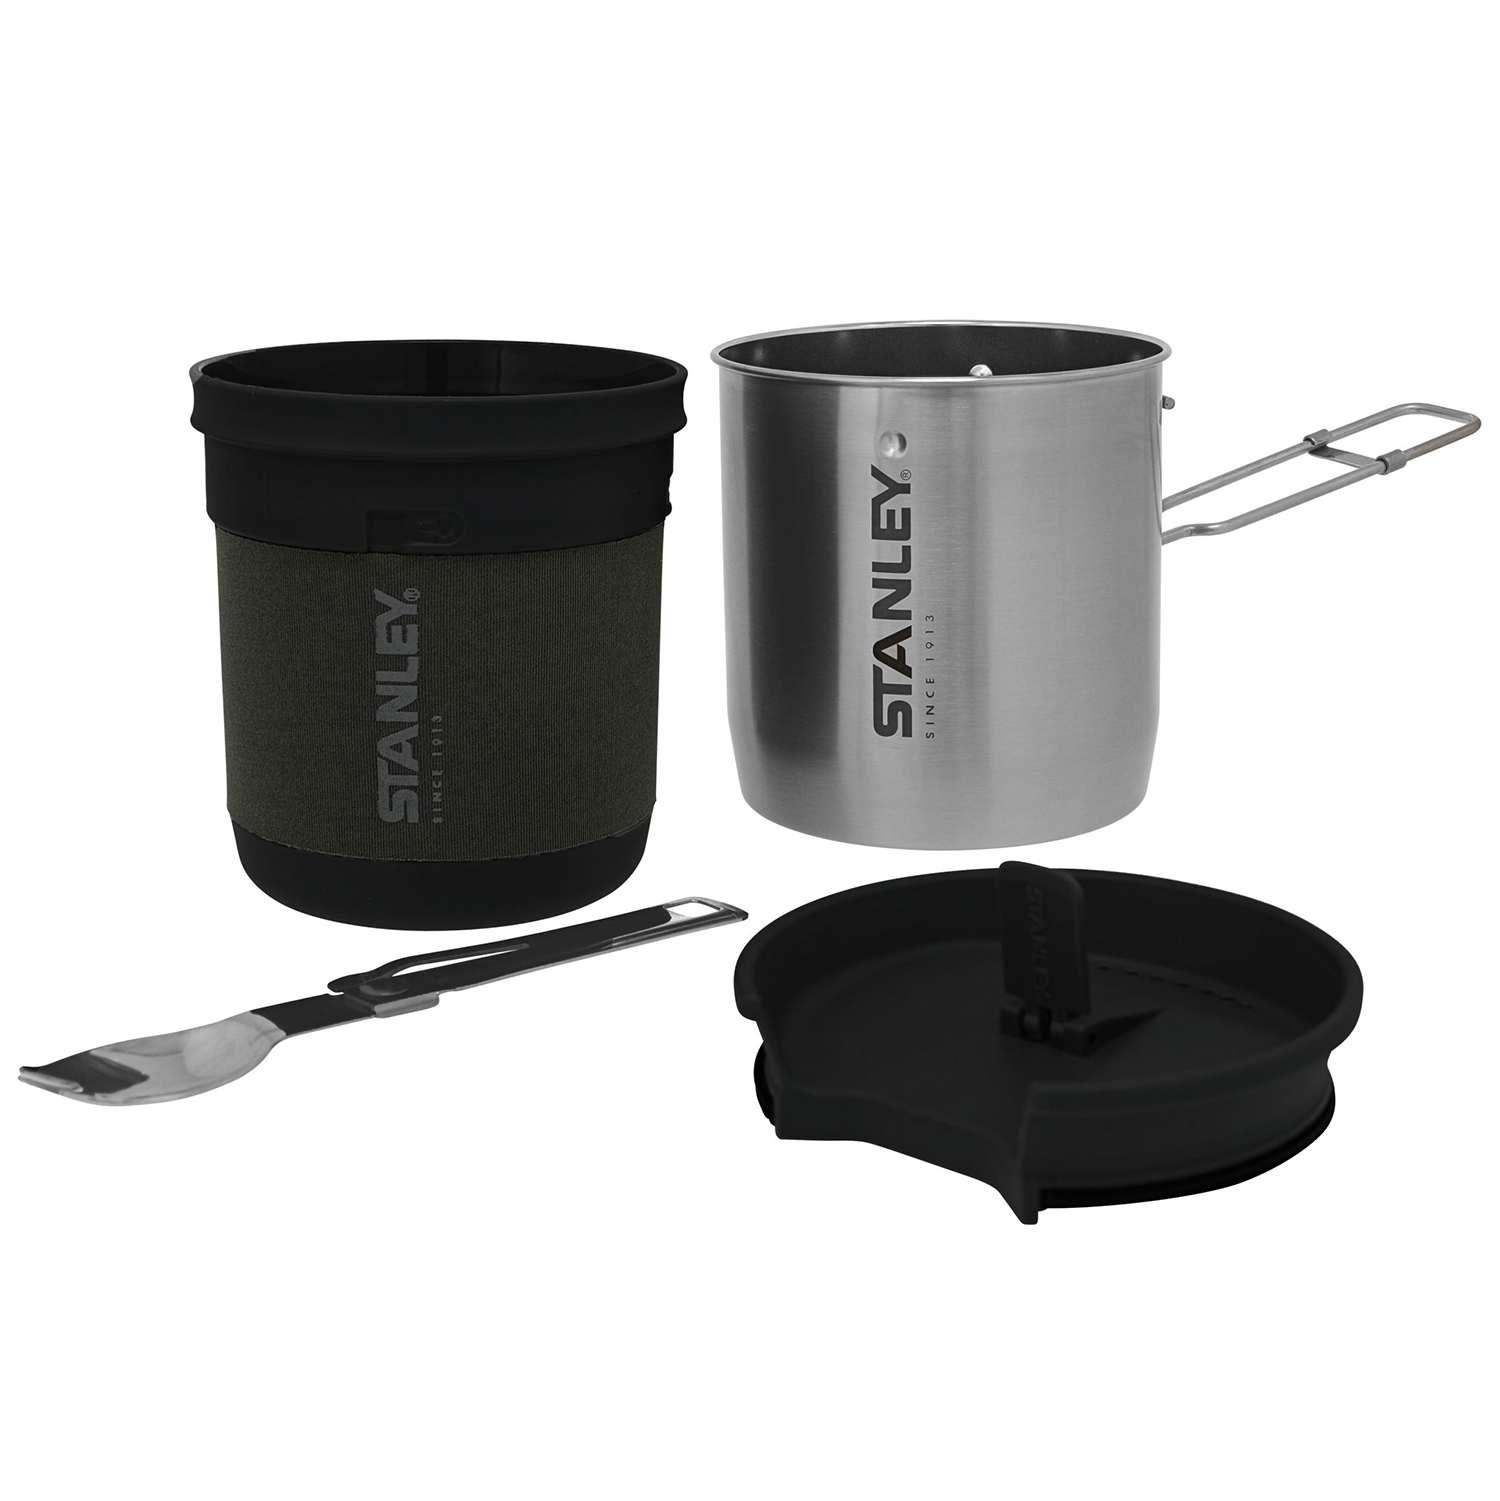 Stanley Adventure Stainless Steel Camping Cooking Set for Two 1.0L / 1.1 QT  with Bowls and Sporks - 6 Piece Camp Cook Set - Stainless Steel Pot with